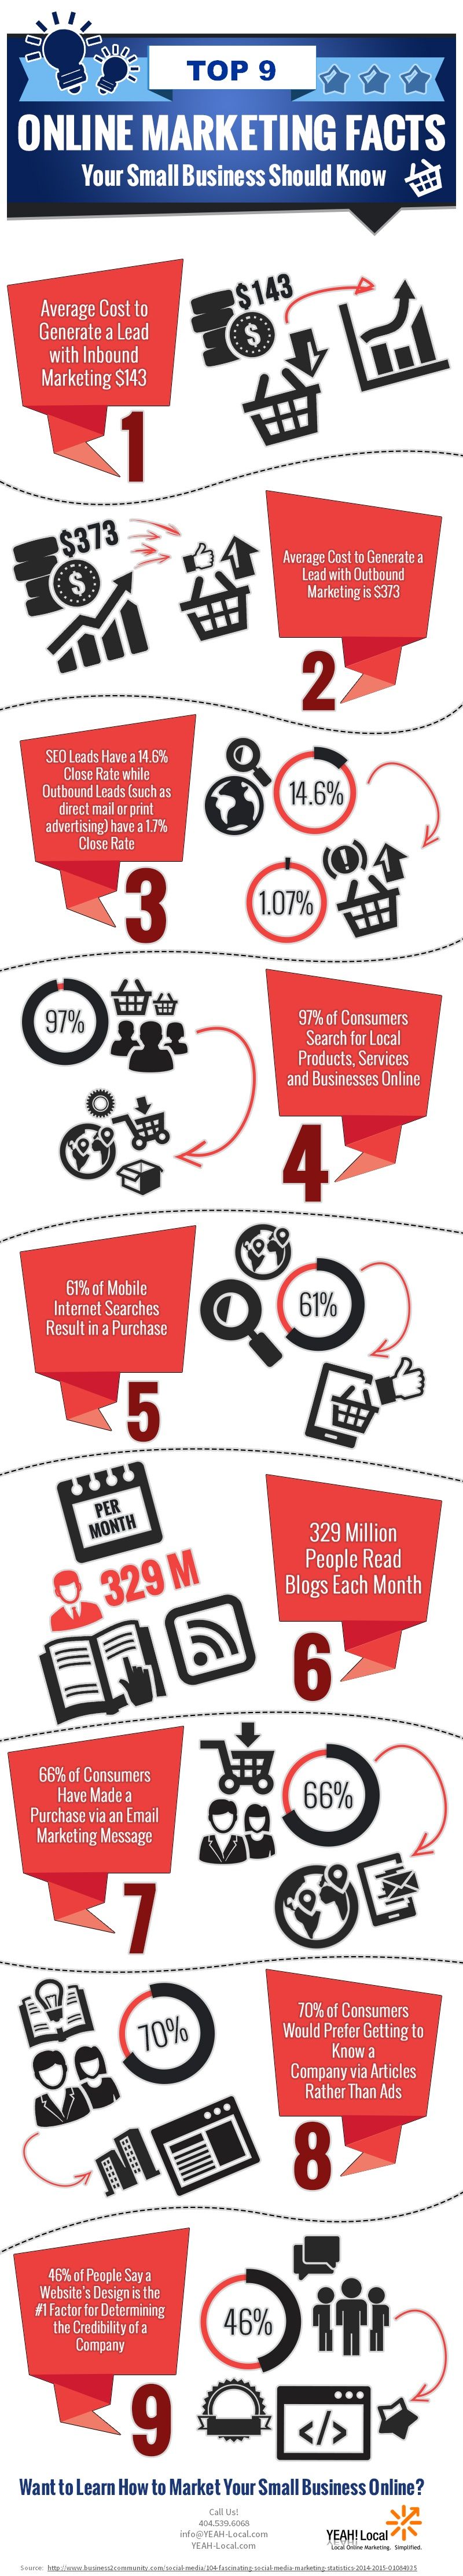 9 Online Marketing Stats for Small Business